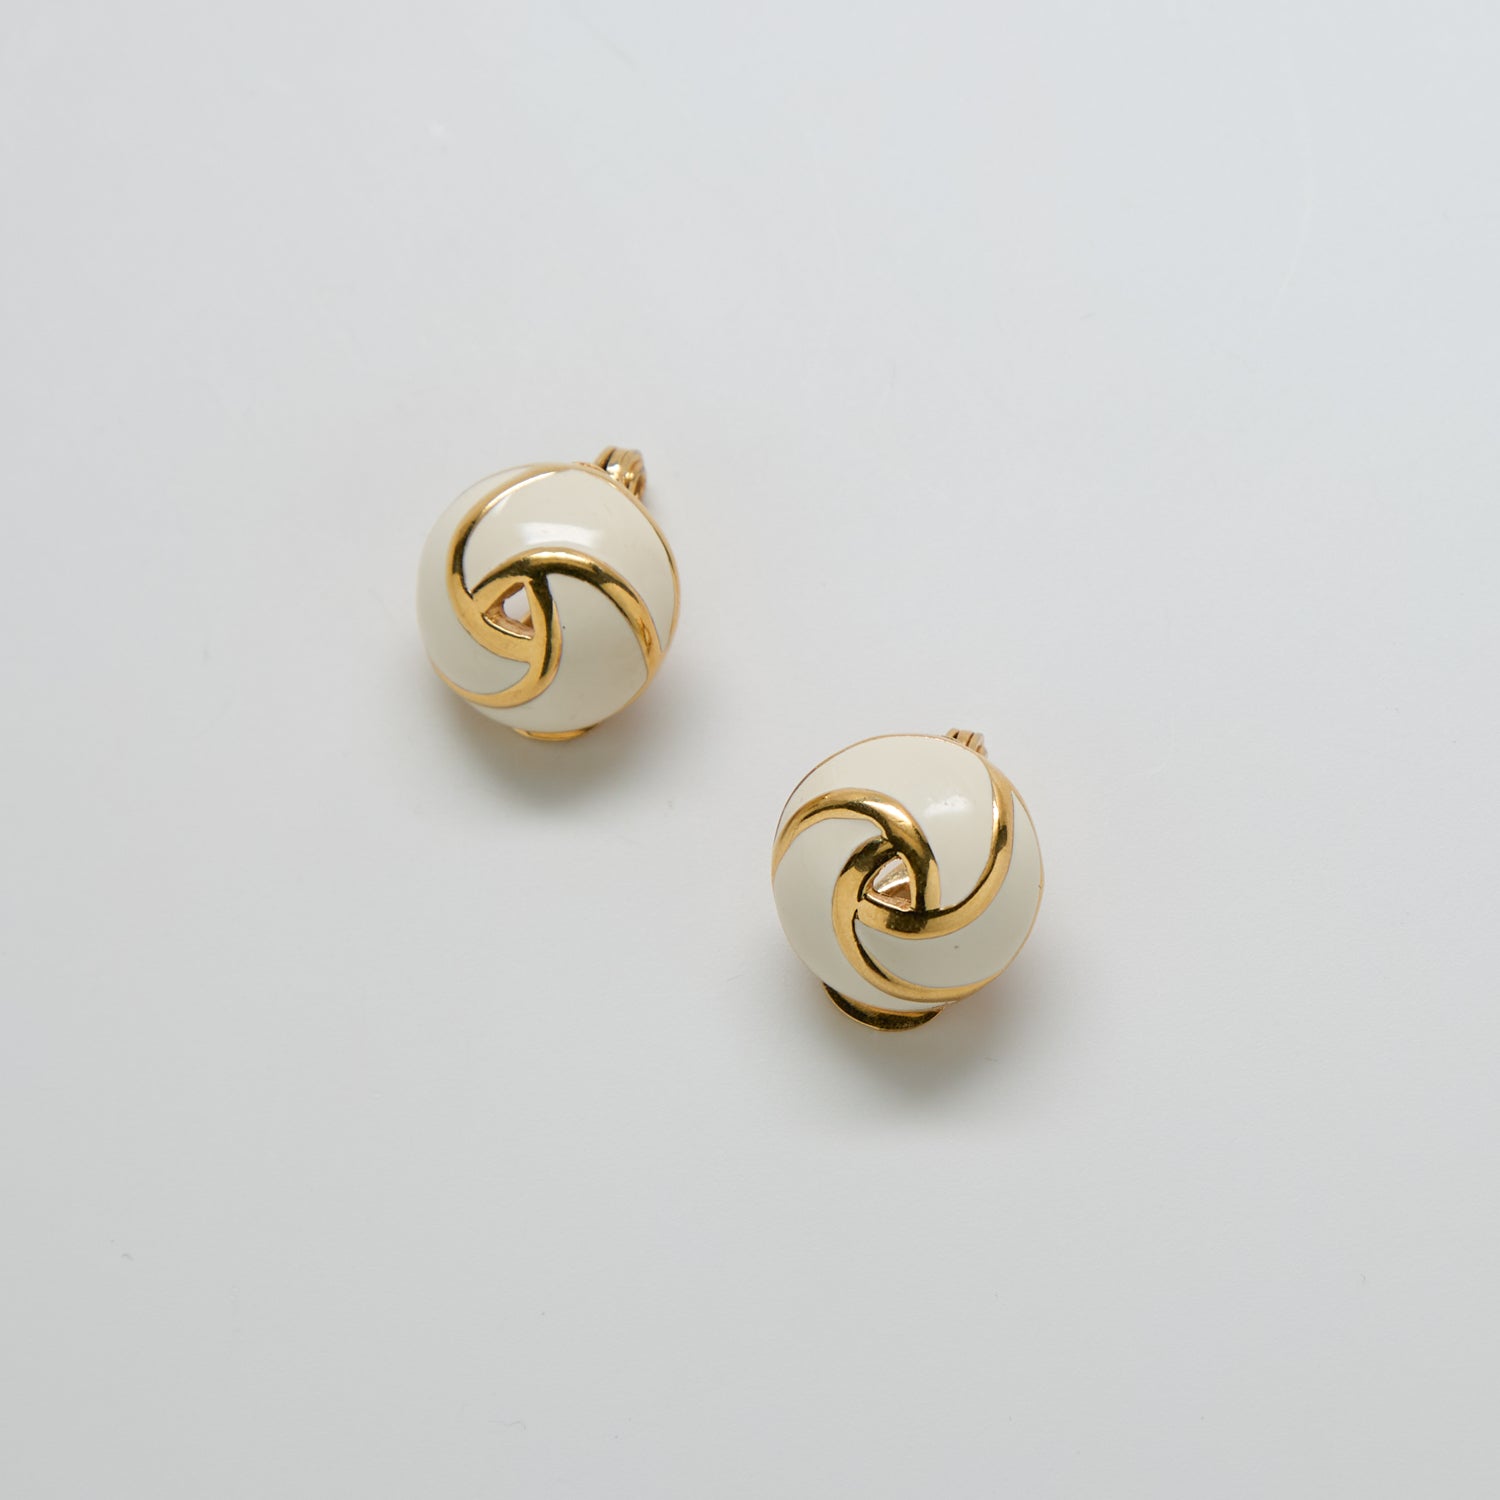 Vintage Gold and White Swirl Stud Earrings